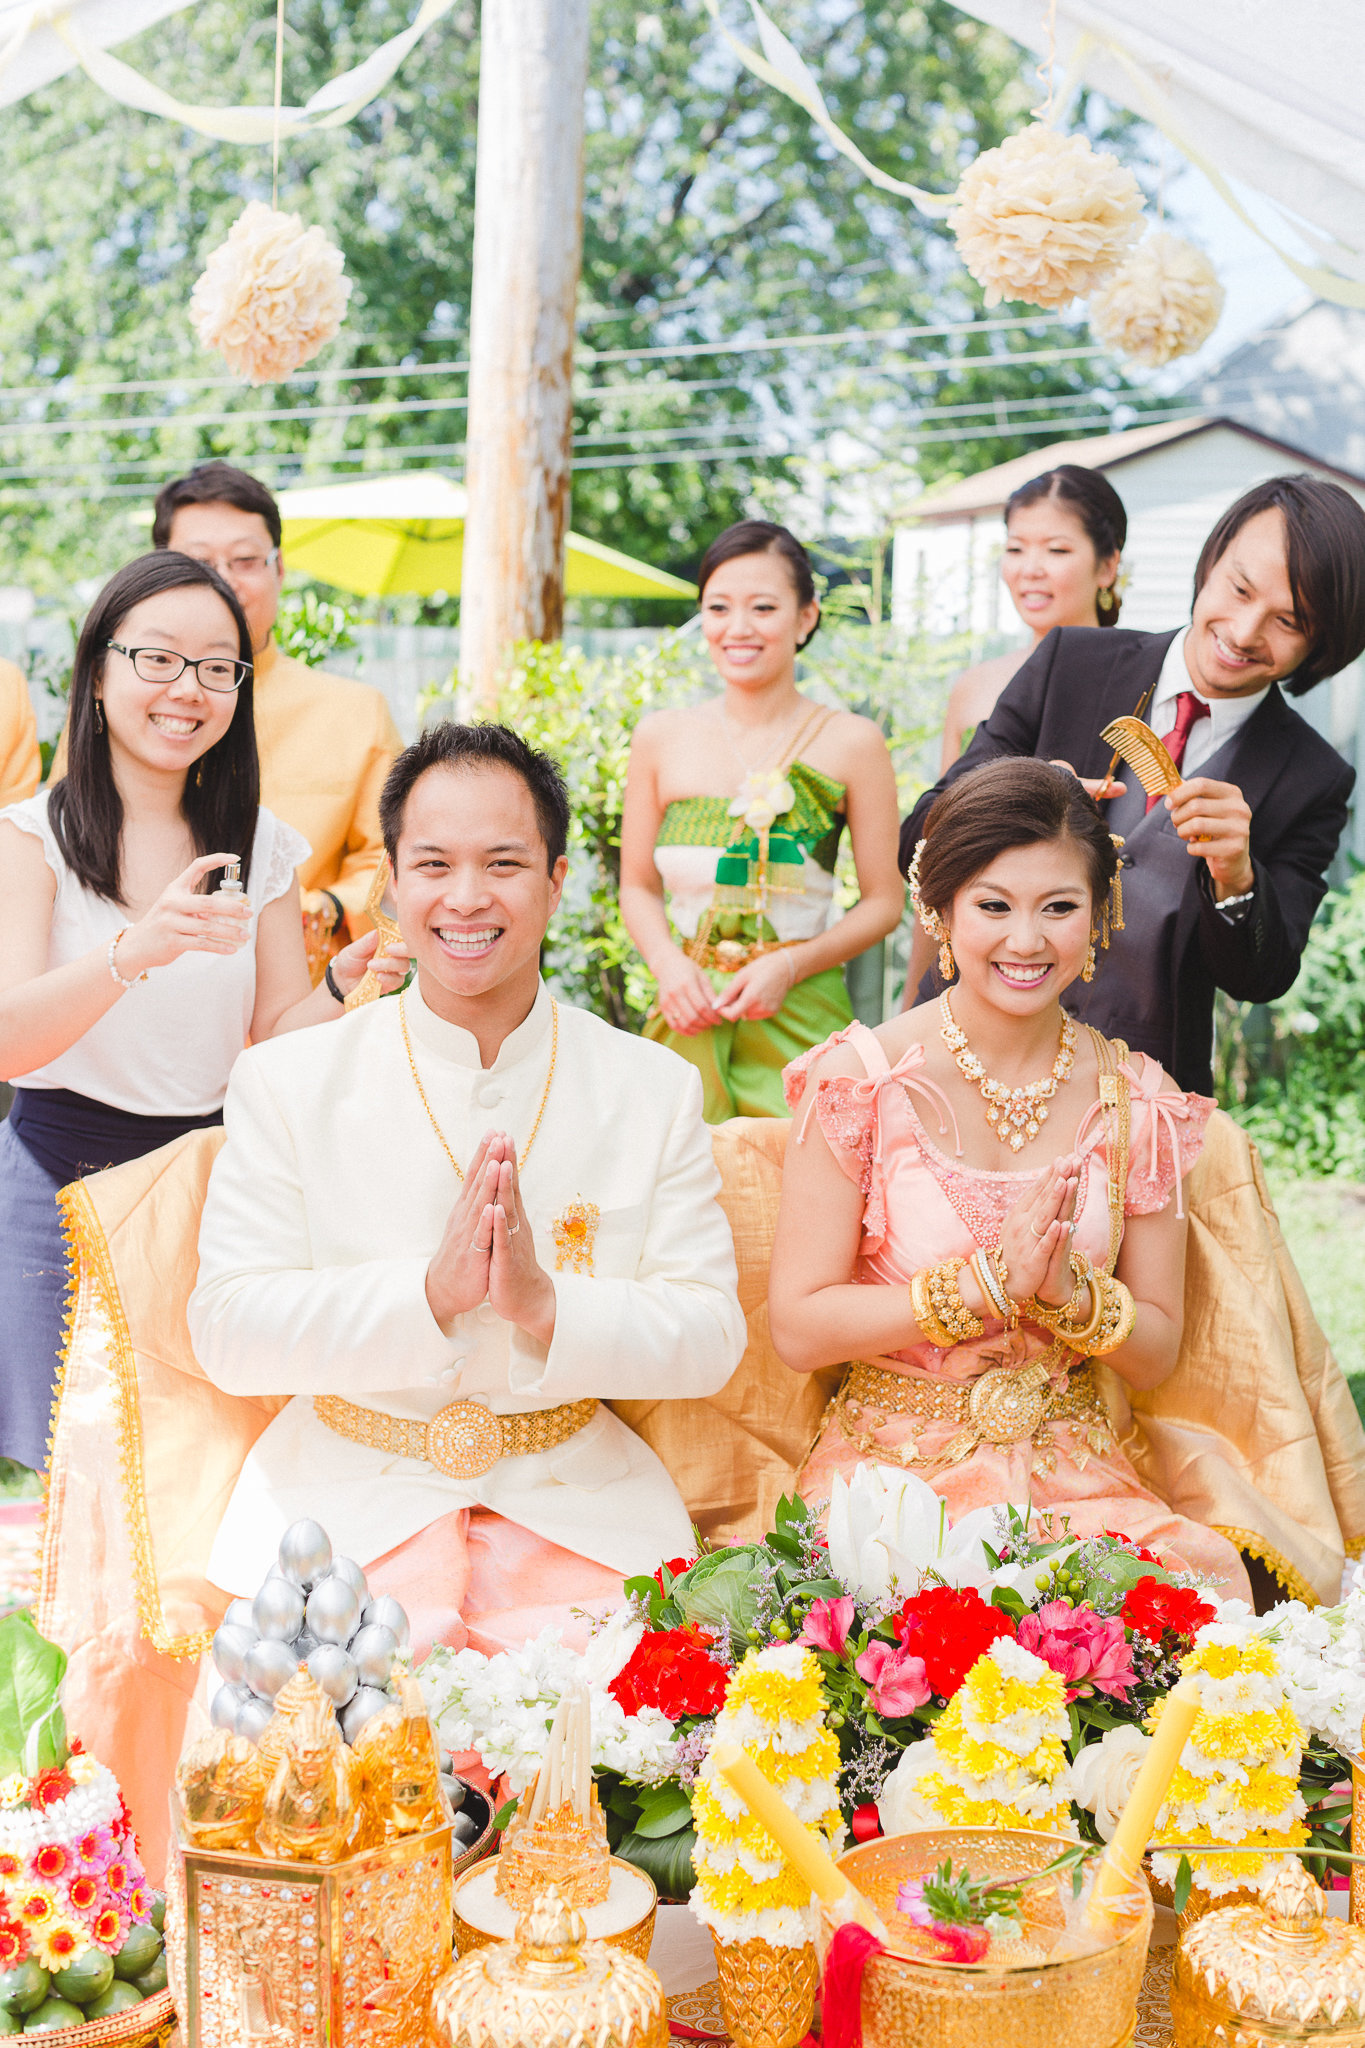 photographe-montreal-mariage-culturel-traditionnel-cambodgien-lisa-renault-photographie-traditional-cultural-cambodian-wedding-50